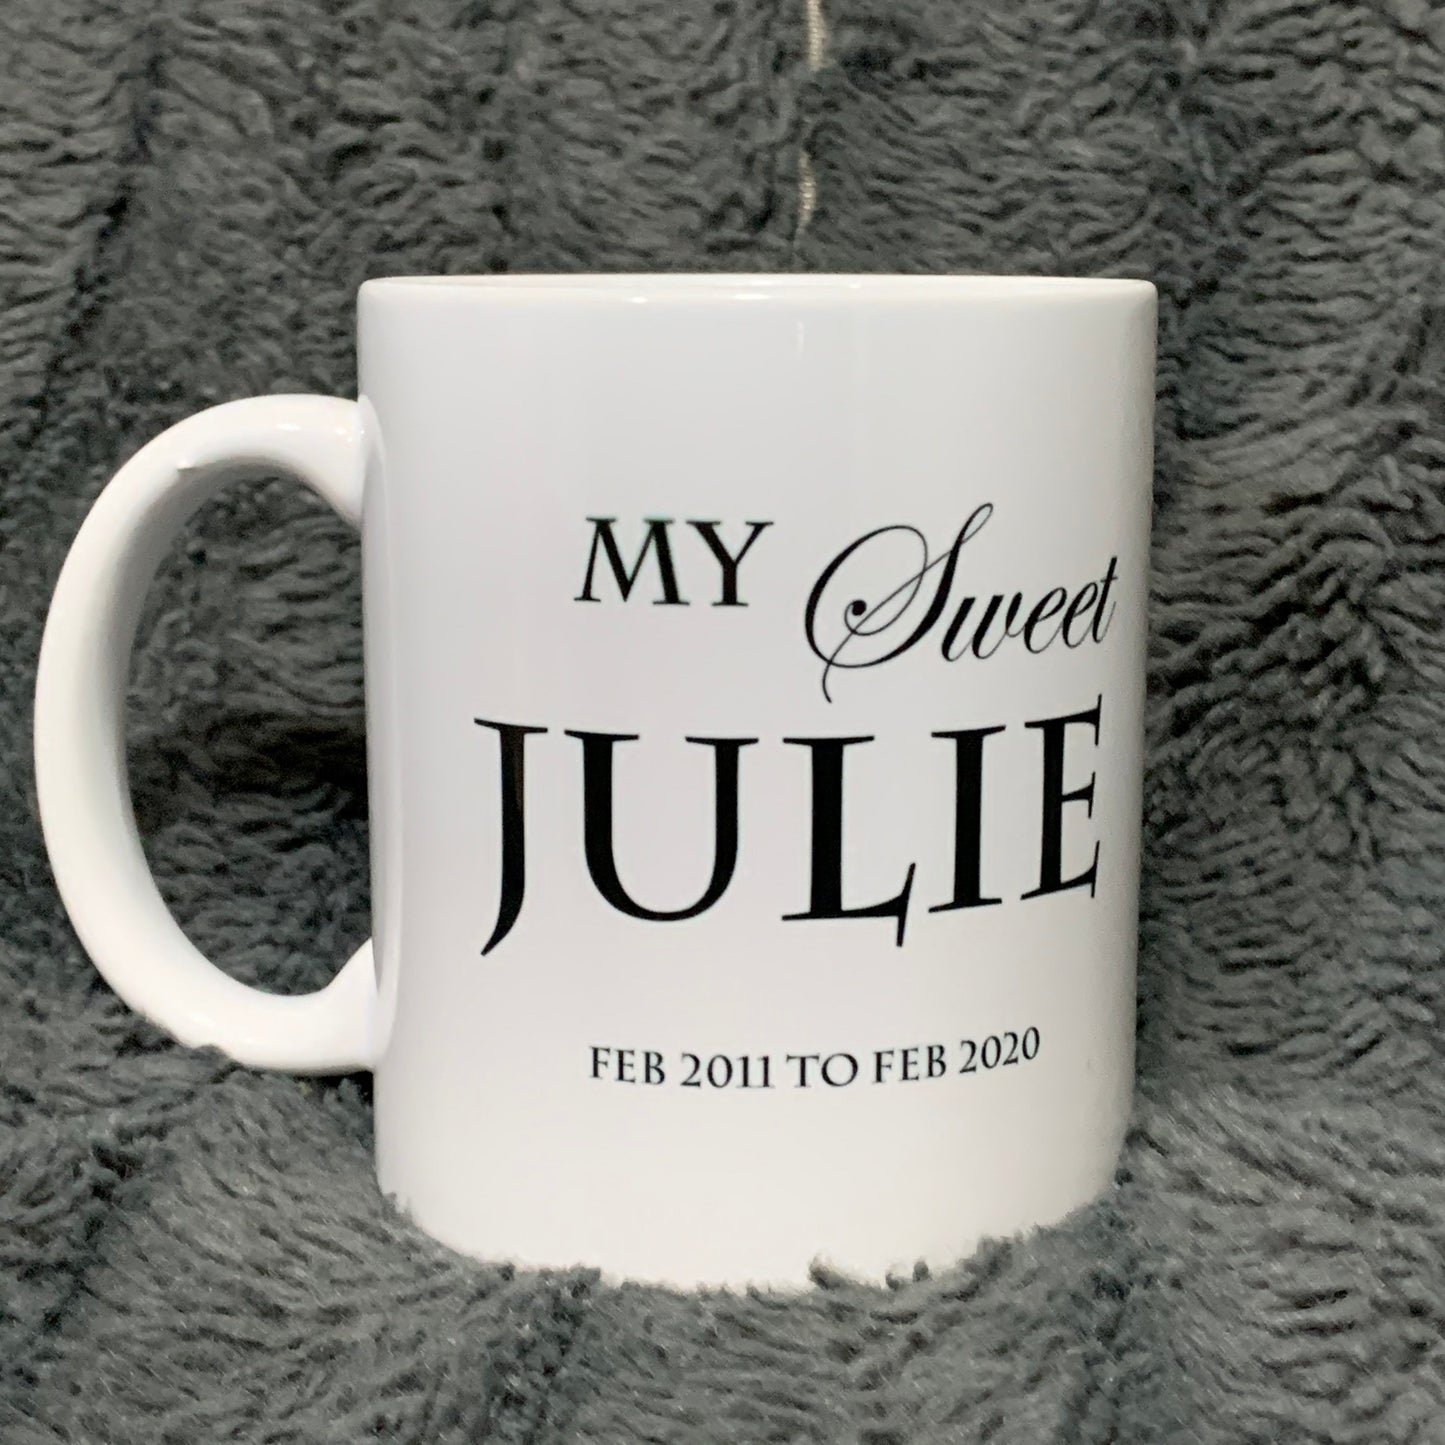 Custom Family Mug Set Gift Ideas - Personalized Gifts for Family - Unique Gifts - 11 oz.